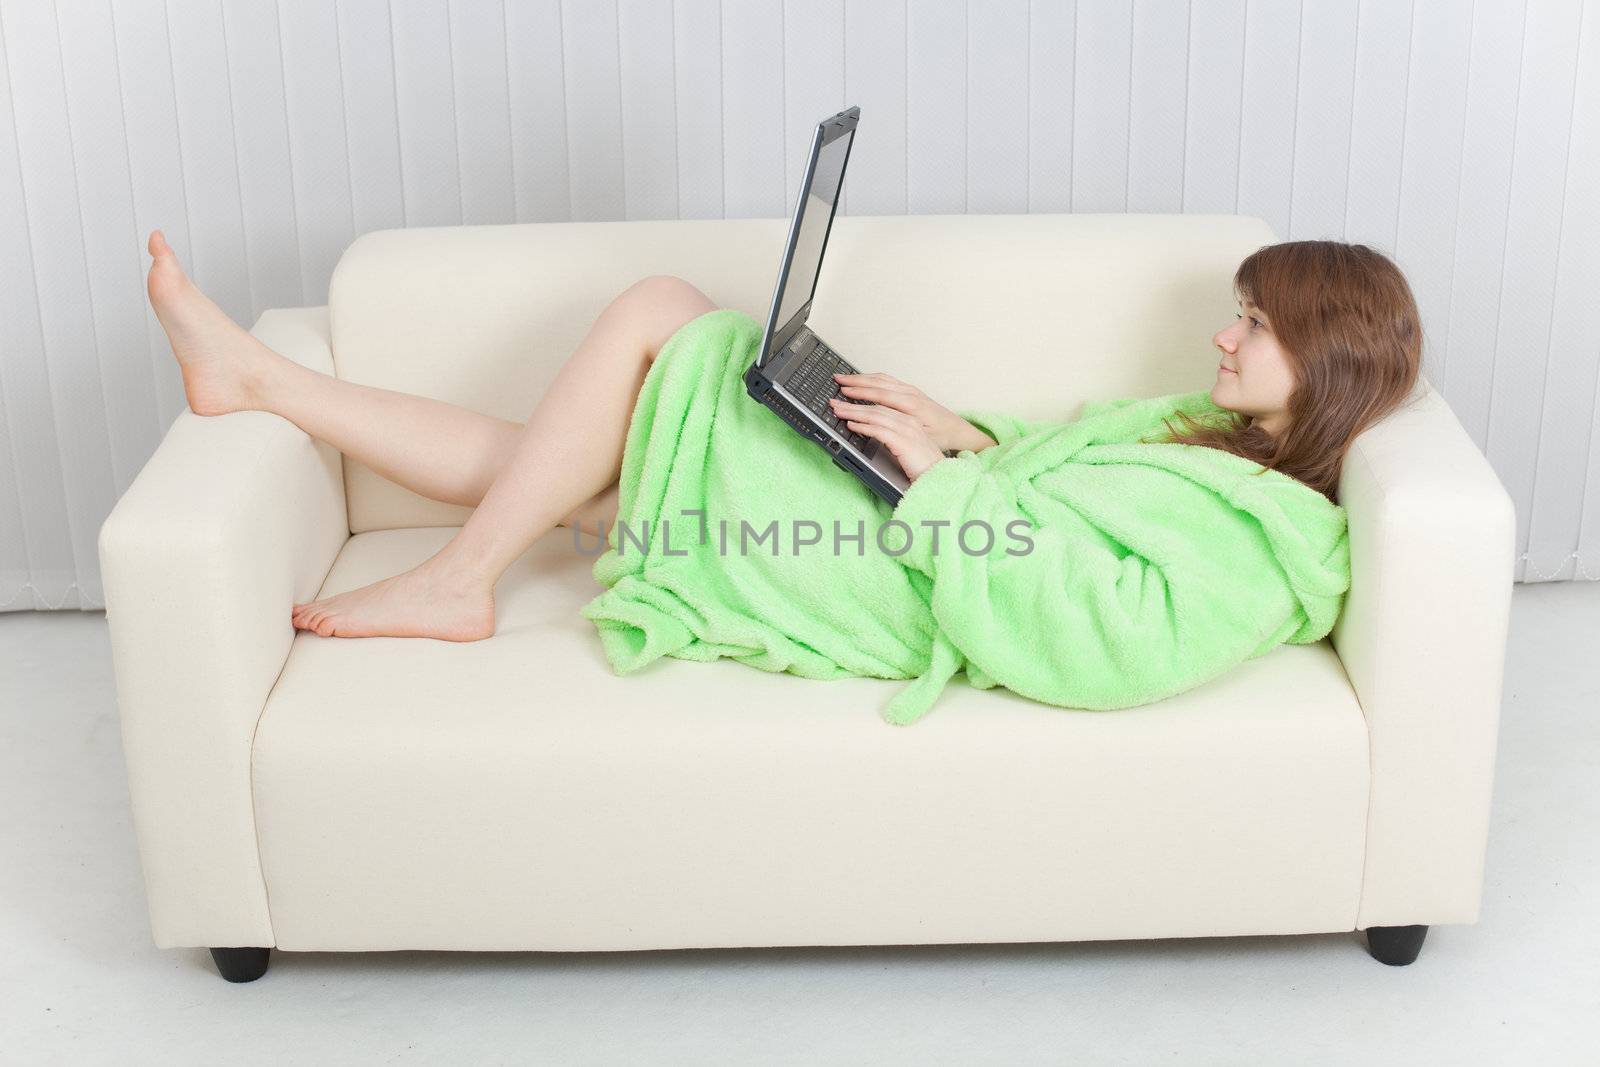 The young woman with the portable computer on a sofa